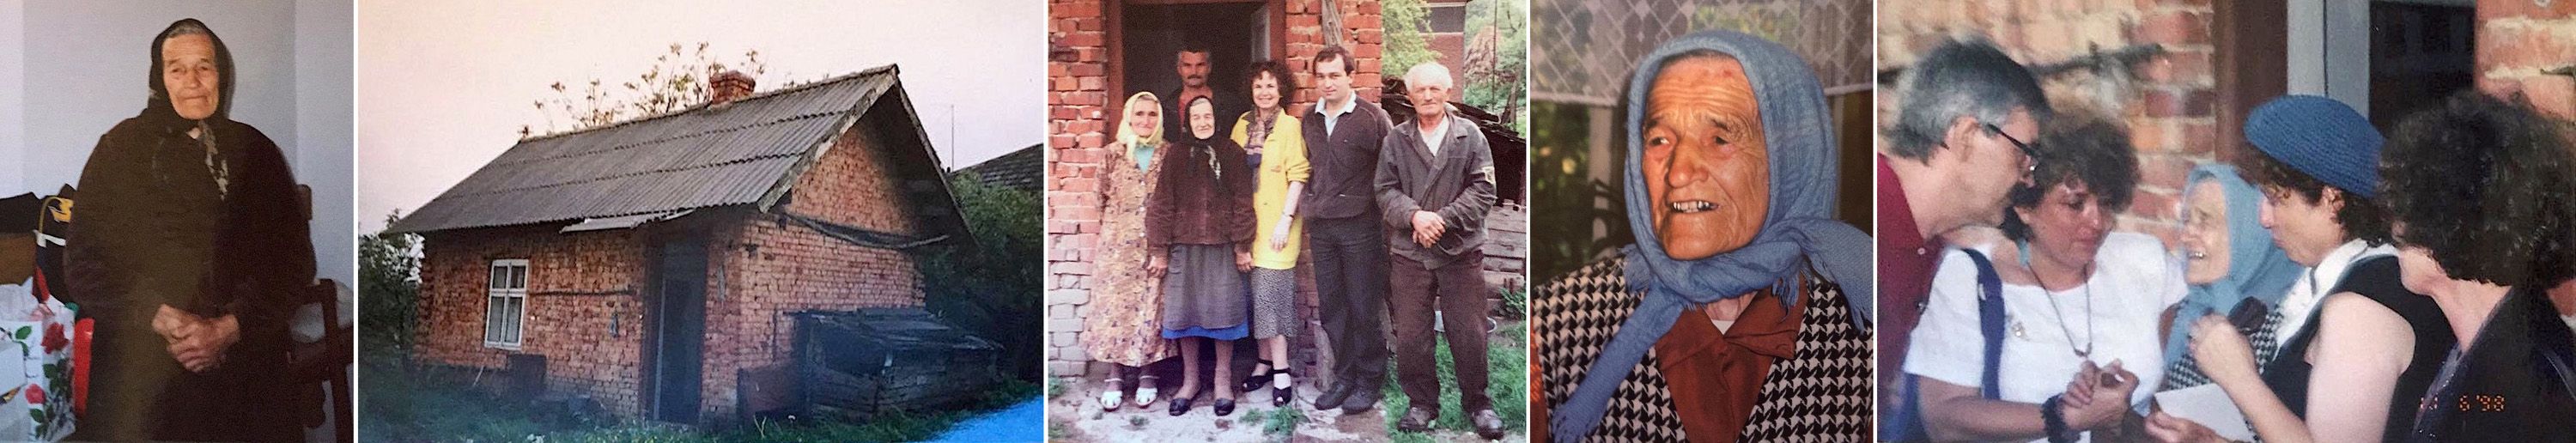 Paranka Burachok at her house in 1994 with Cipora and the family of one of Paranka’s sons, and in 1998 with Cipora and her sisters - фото 72381